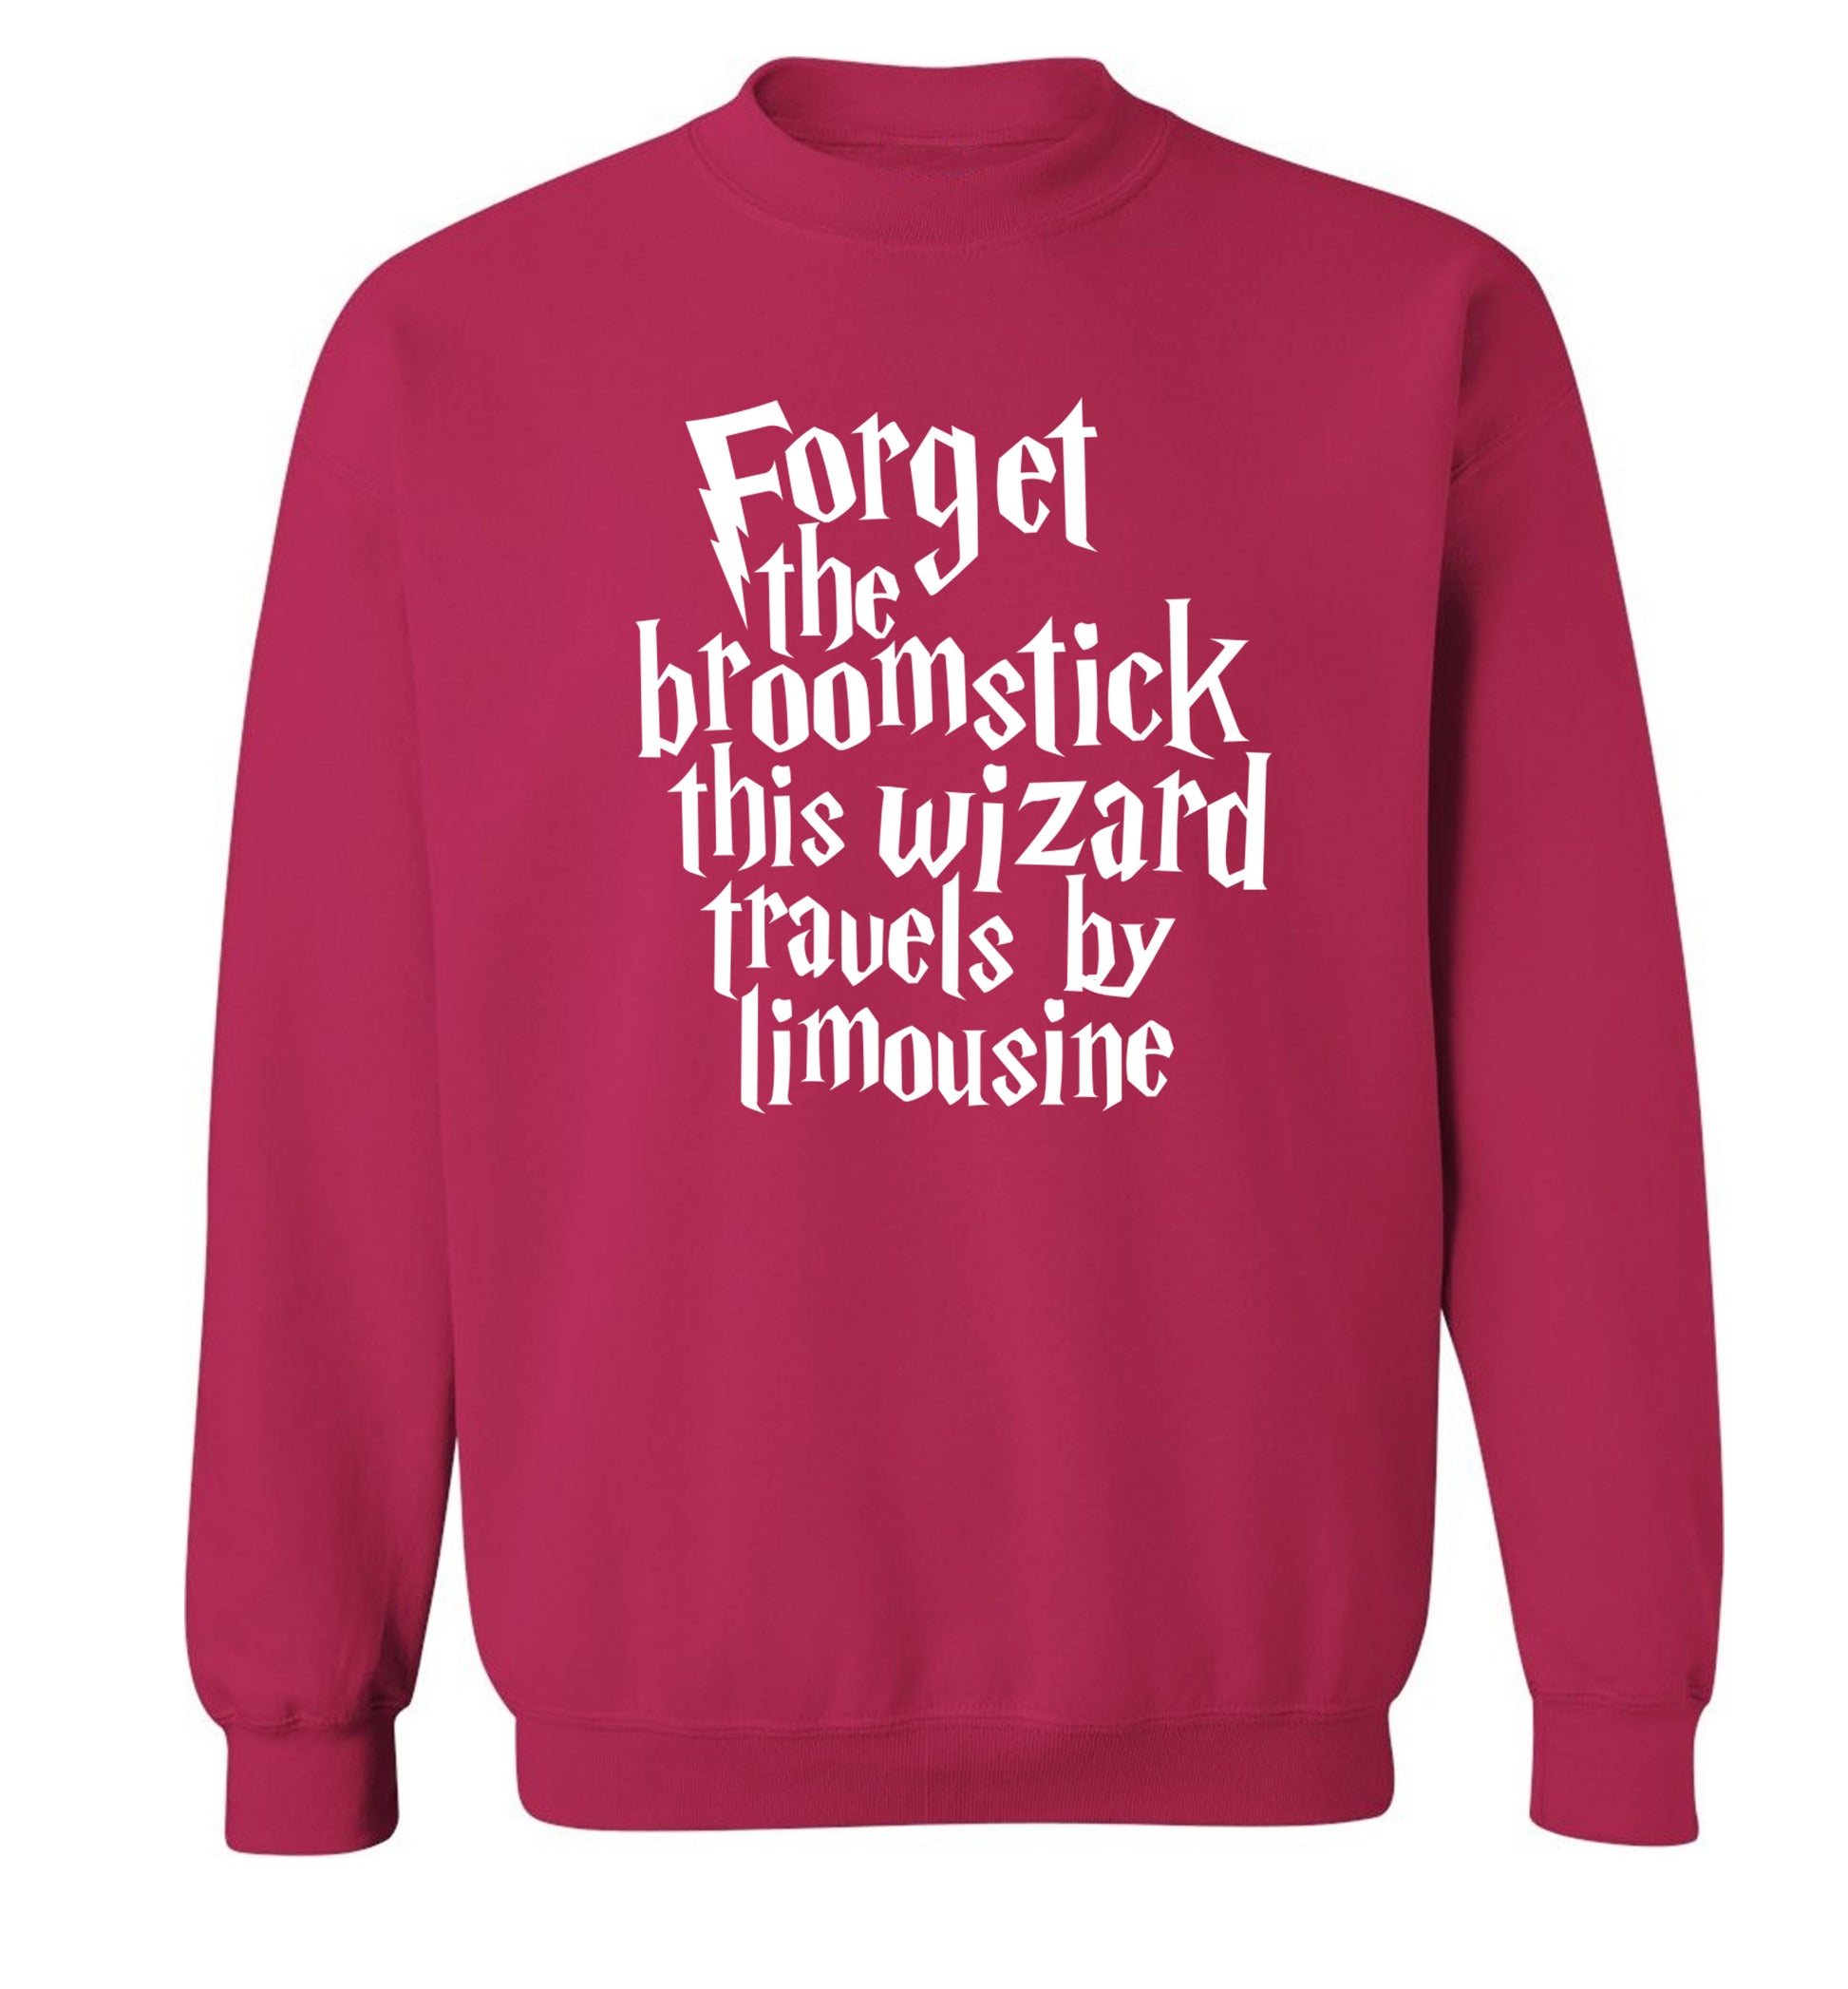 Forget the broomstick this wizard travels by limousine Adult's unisexpink Sweater 2XL